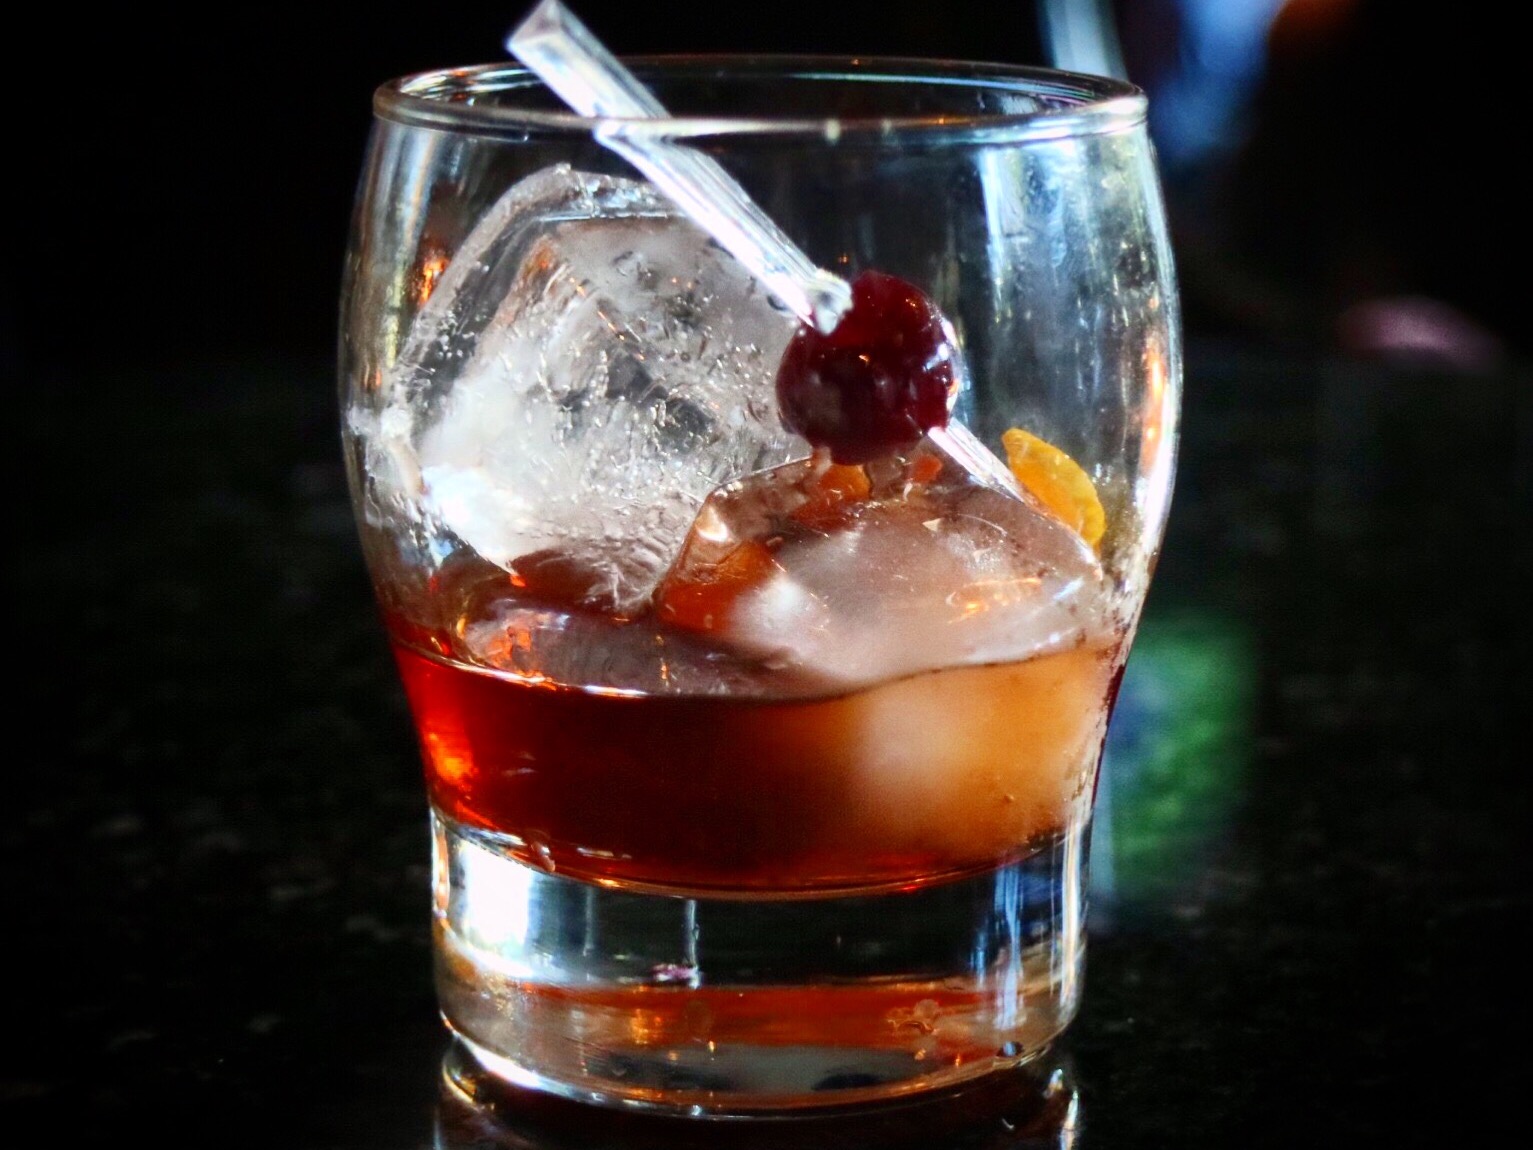 "Old Fashioned"